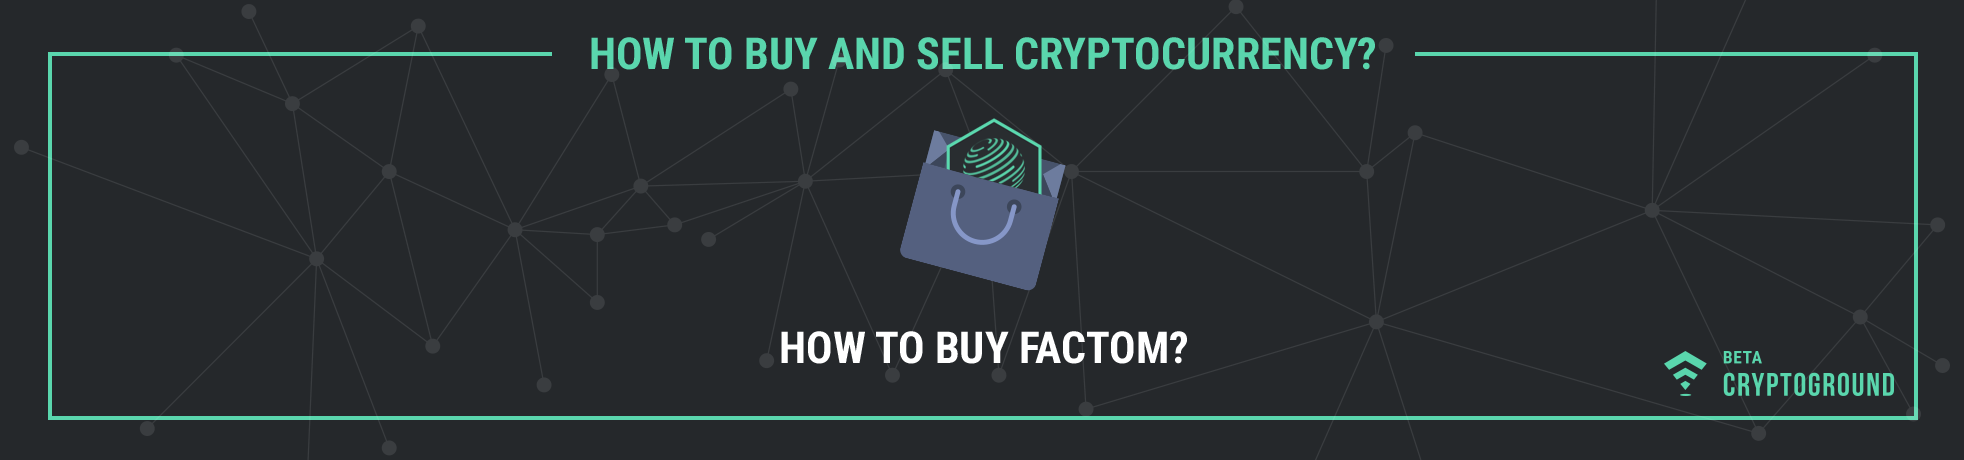 how to buy factom cryptocurrency